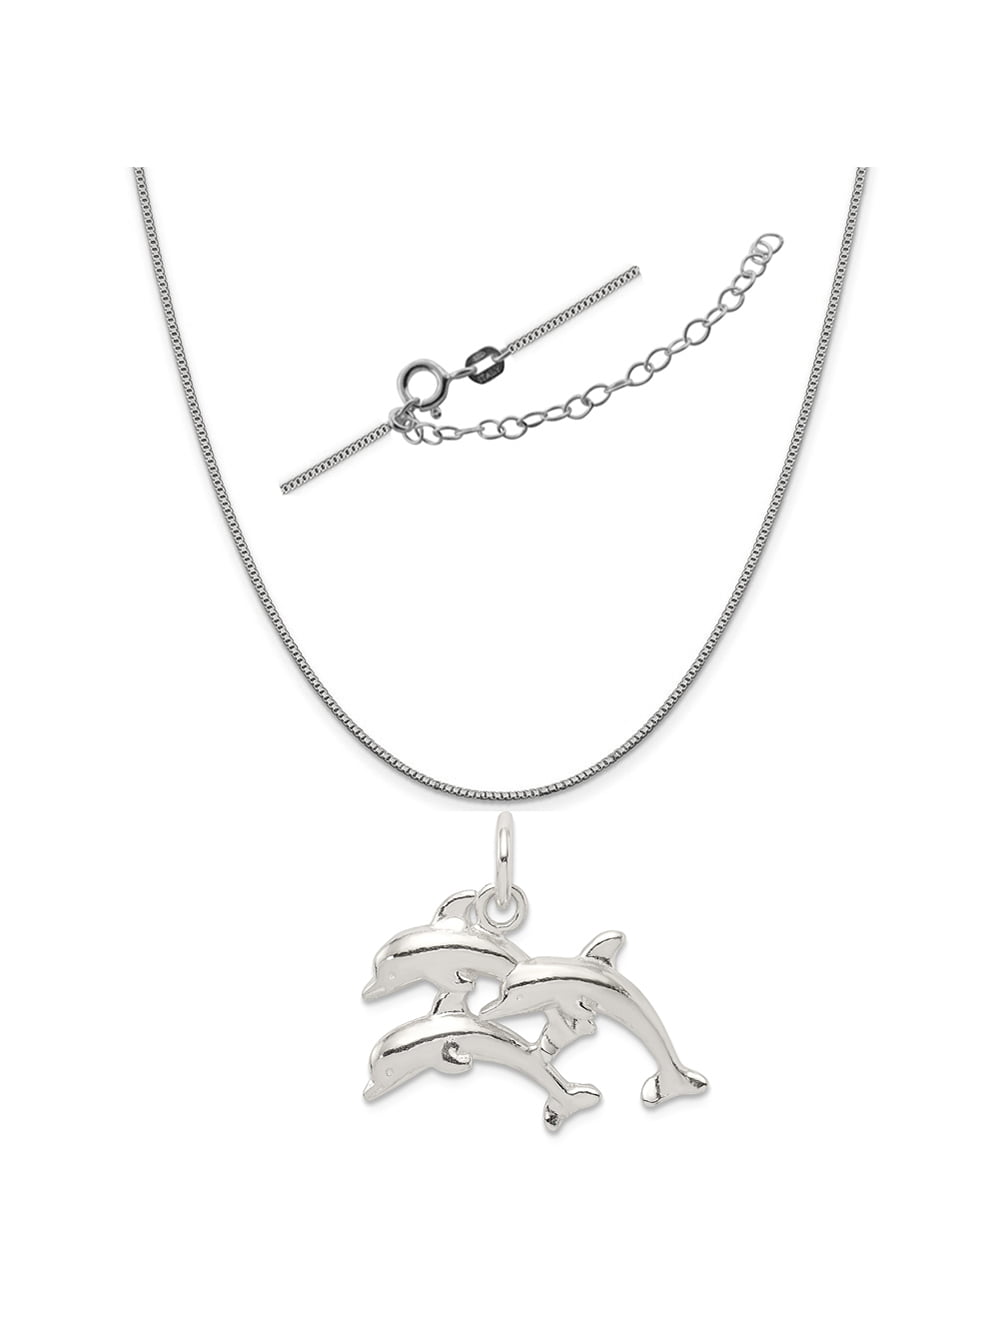 18 Mireval Sterling Silver Black Enamel Cat Charm on a Sterling Silver Carded Box Chain Necklace